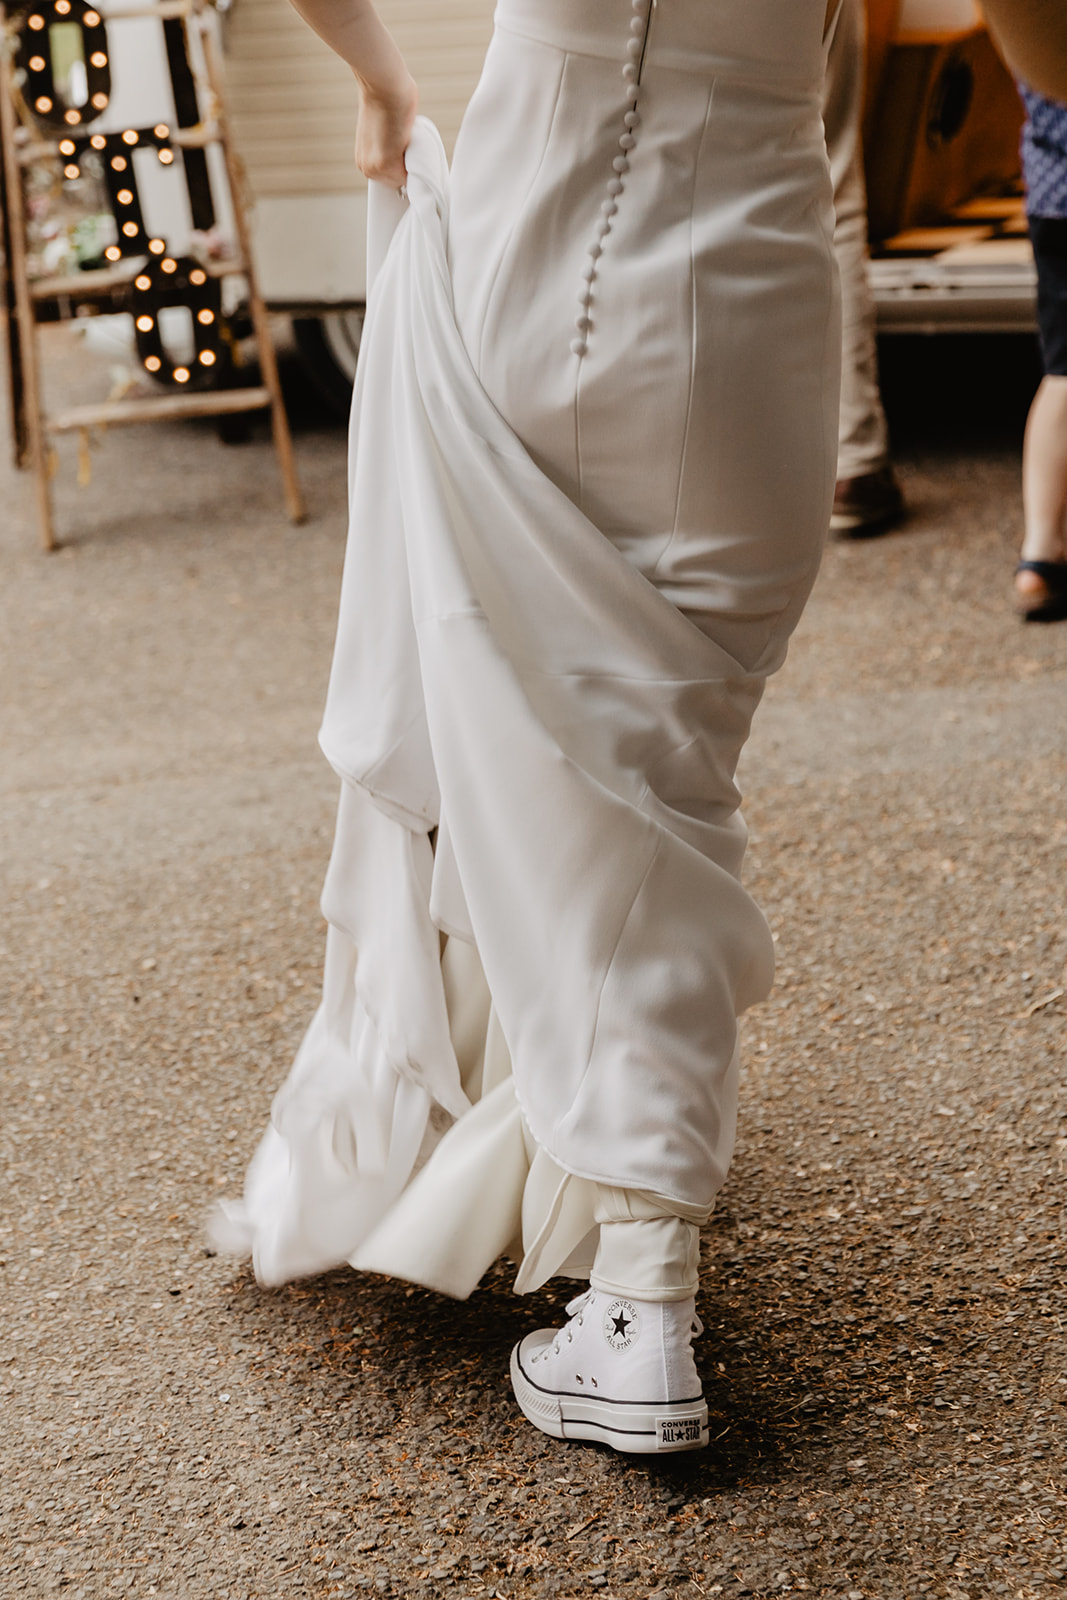 Bride dancing in converses at a Bury Manor Barn Wedding in Sussex. Photographer OliveJoy Photography.